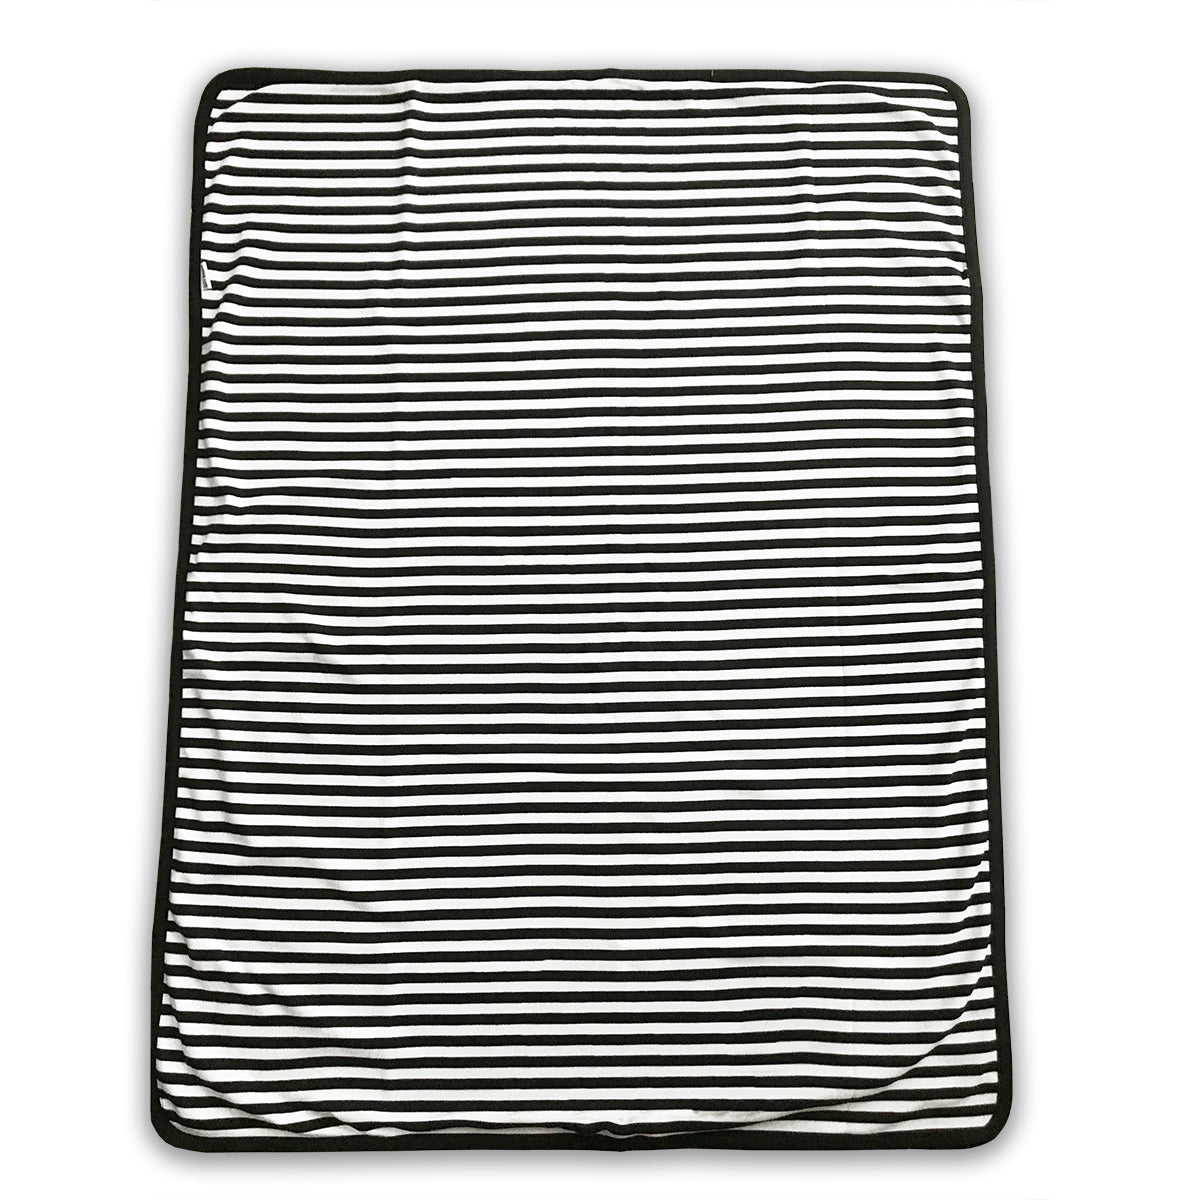 Lazy Baby Organic Cotton Black and White Blanket - Lazy Baby